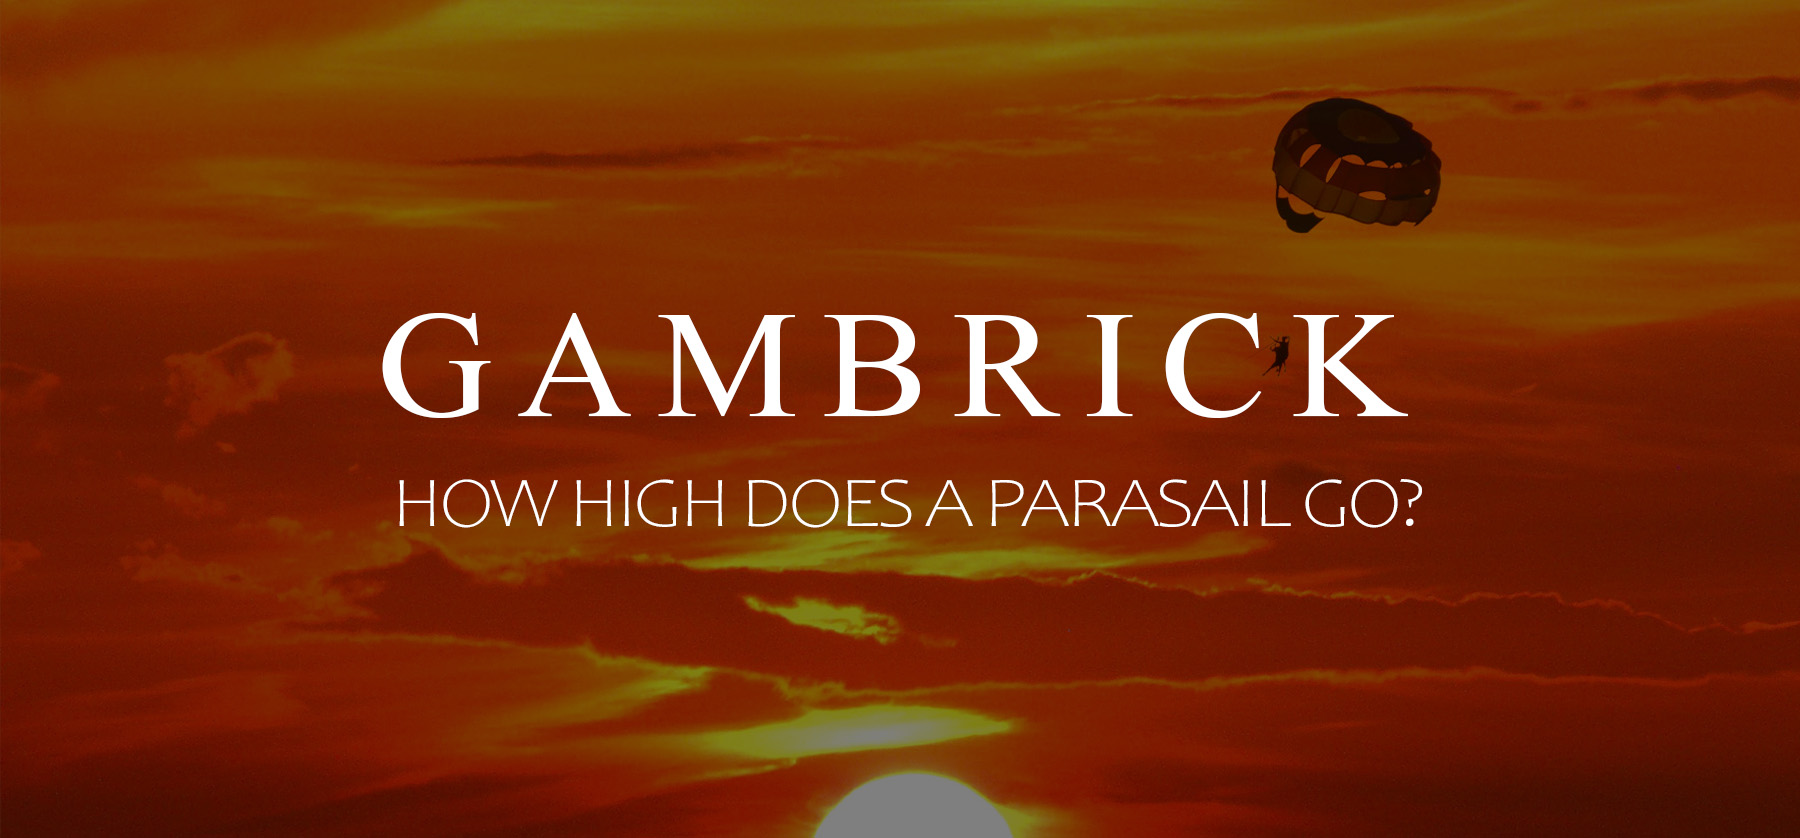 How High Does A Parasail Go banner 1.0